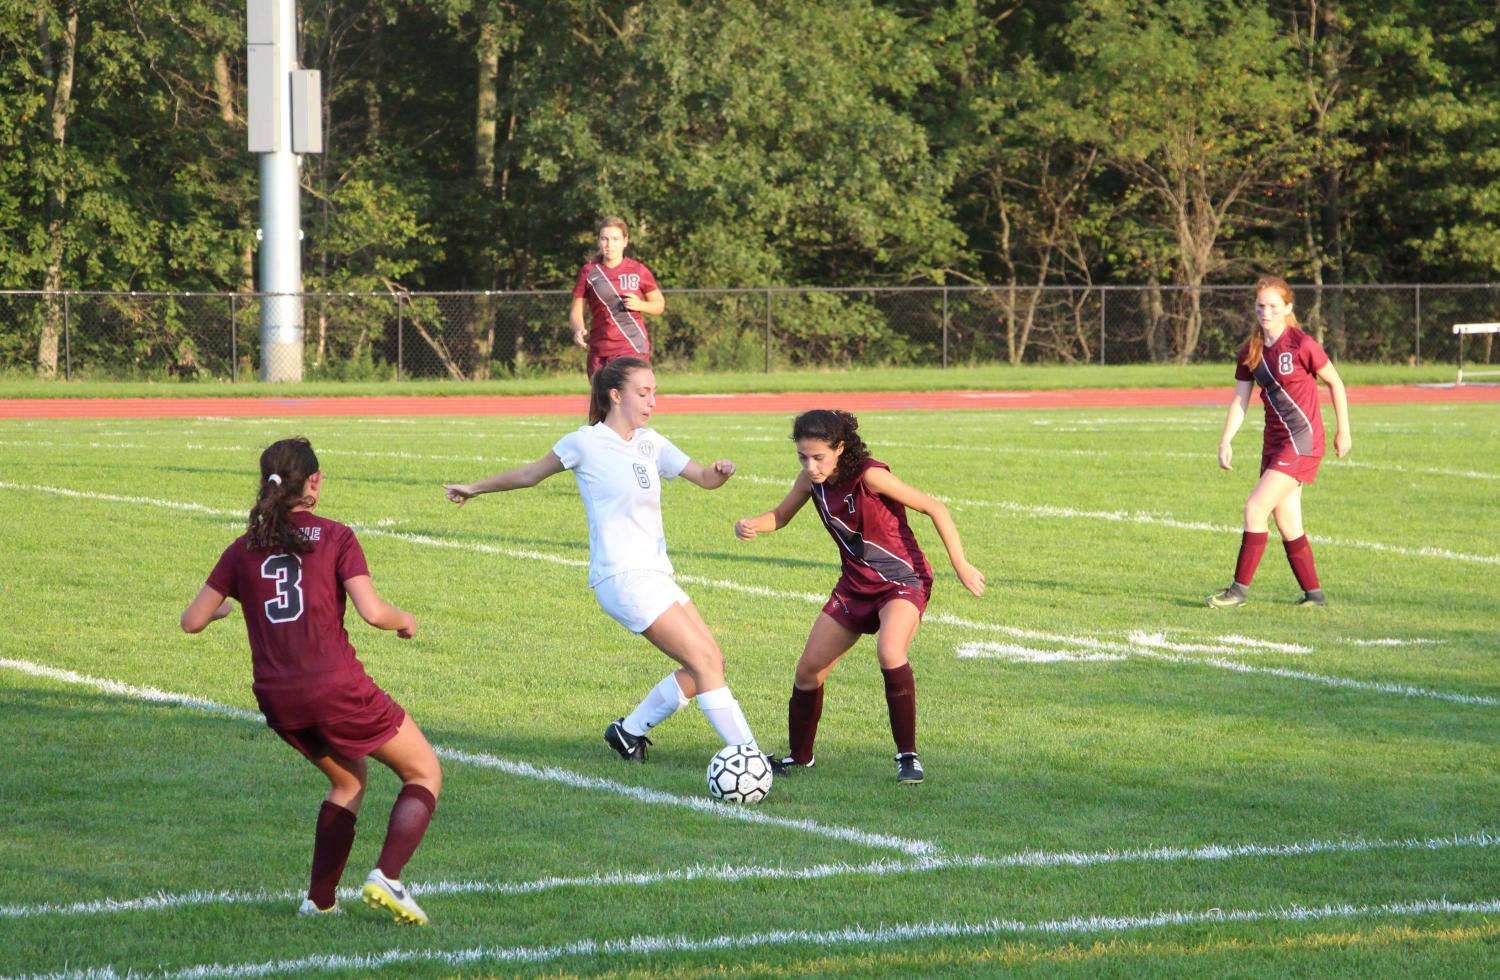 Senior Laura Walter-McNeill looks to lead the team in another successful season for Varsity Girls’ Soccer.